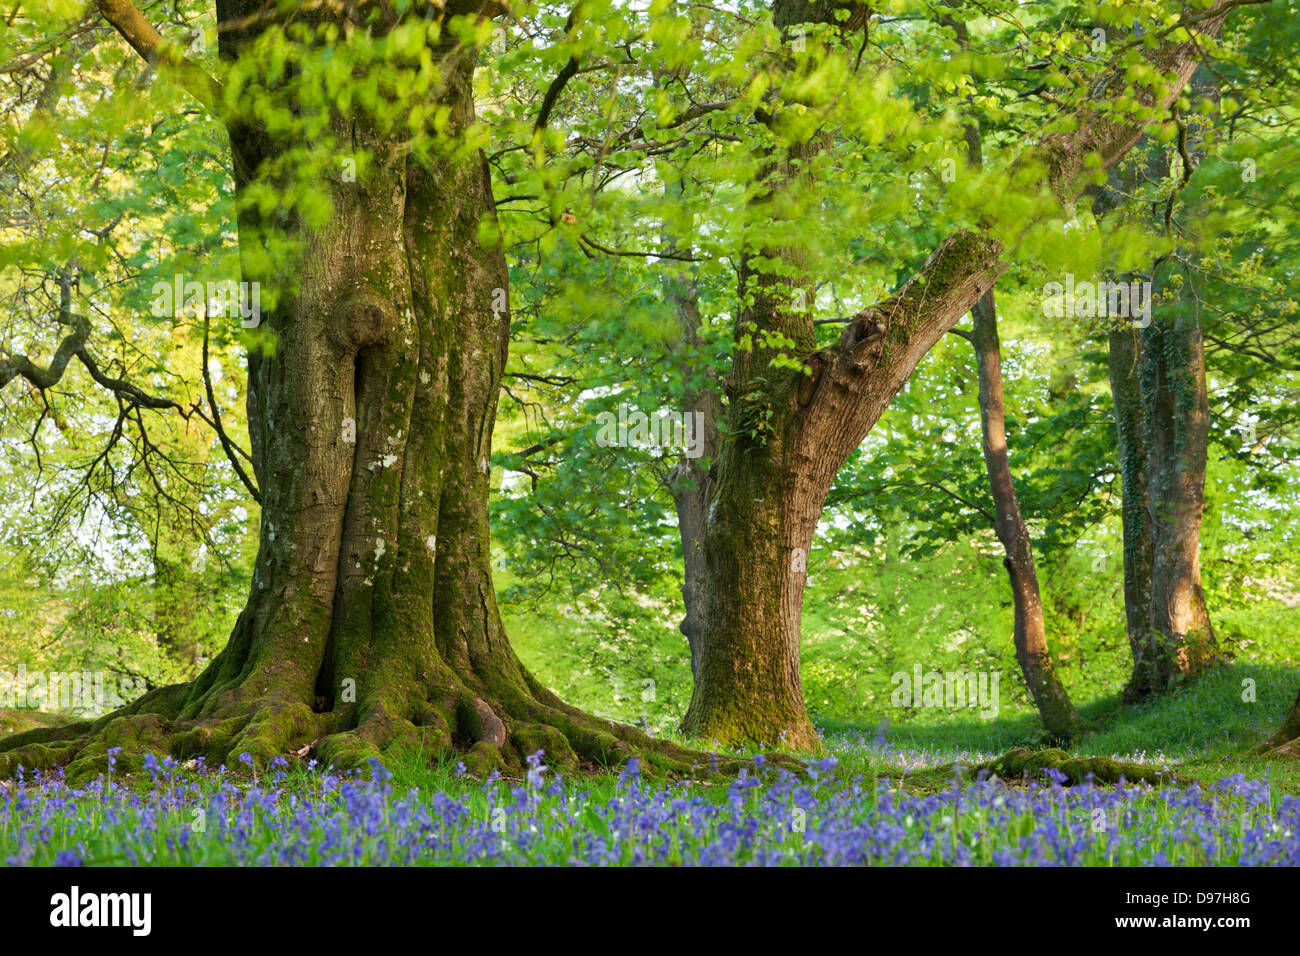 Beech and Oak trees above a carpet of bluebells in a woodland, Blackbury Camp, Devon, England. Spring (May) 2012. Stock Photo